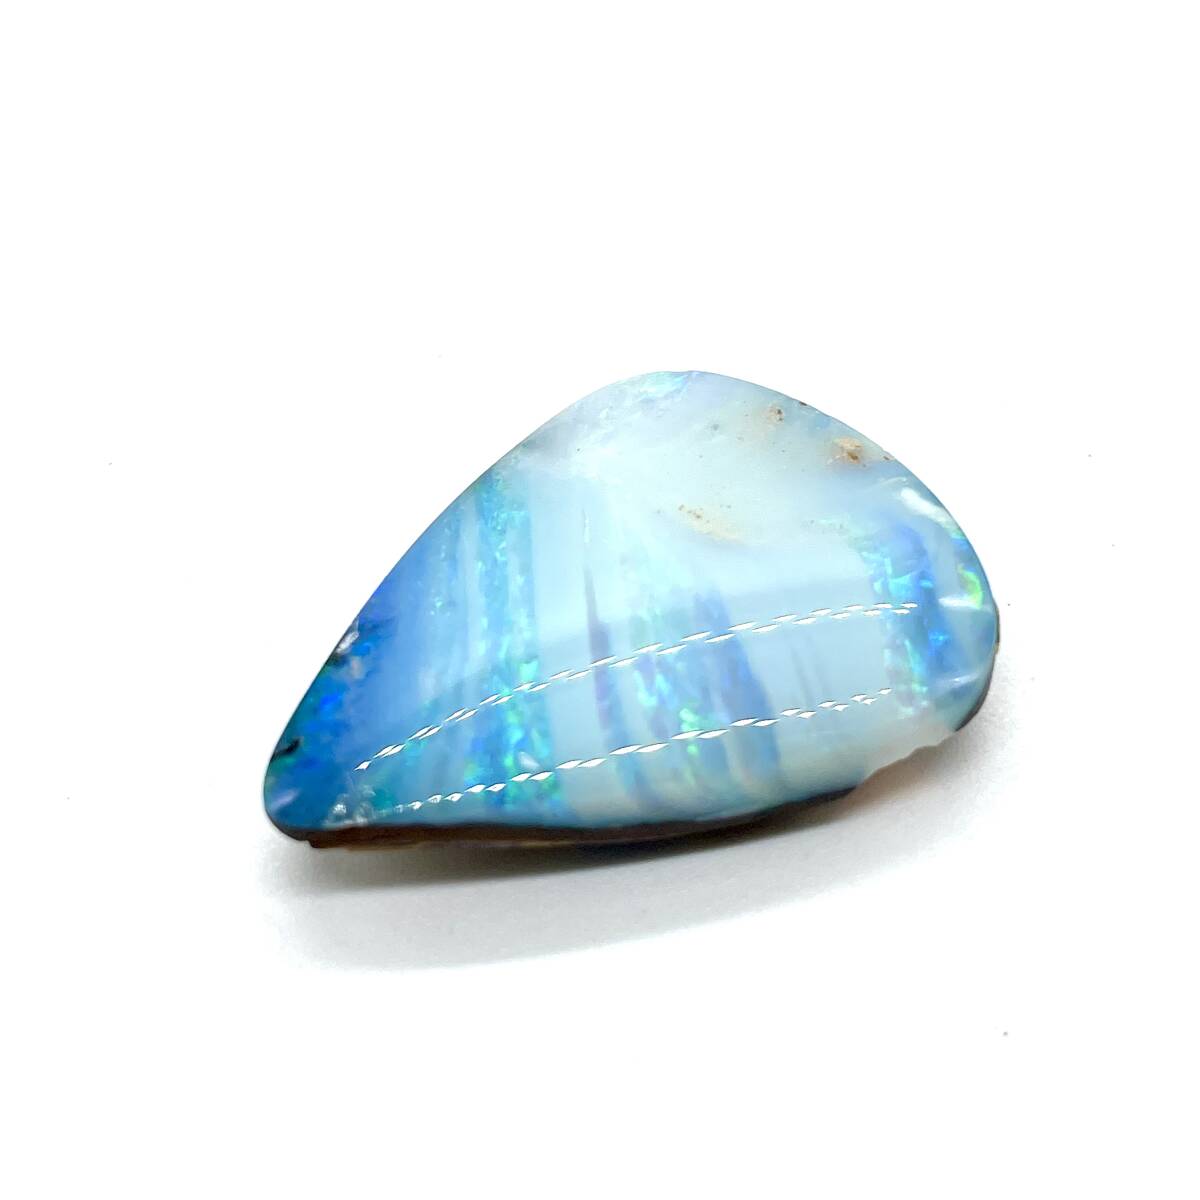  natural boruda- opal loose 20.743ctso-ting attaching approximately 22.7×29.1×6.1mm unset jewel remove stone gem jewelry natural stone jewelry boulder opal